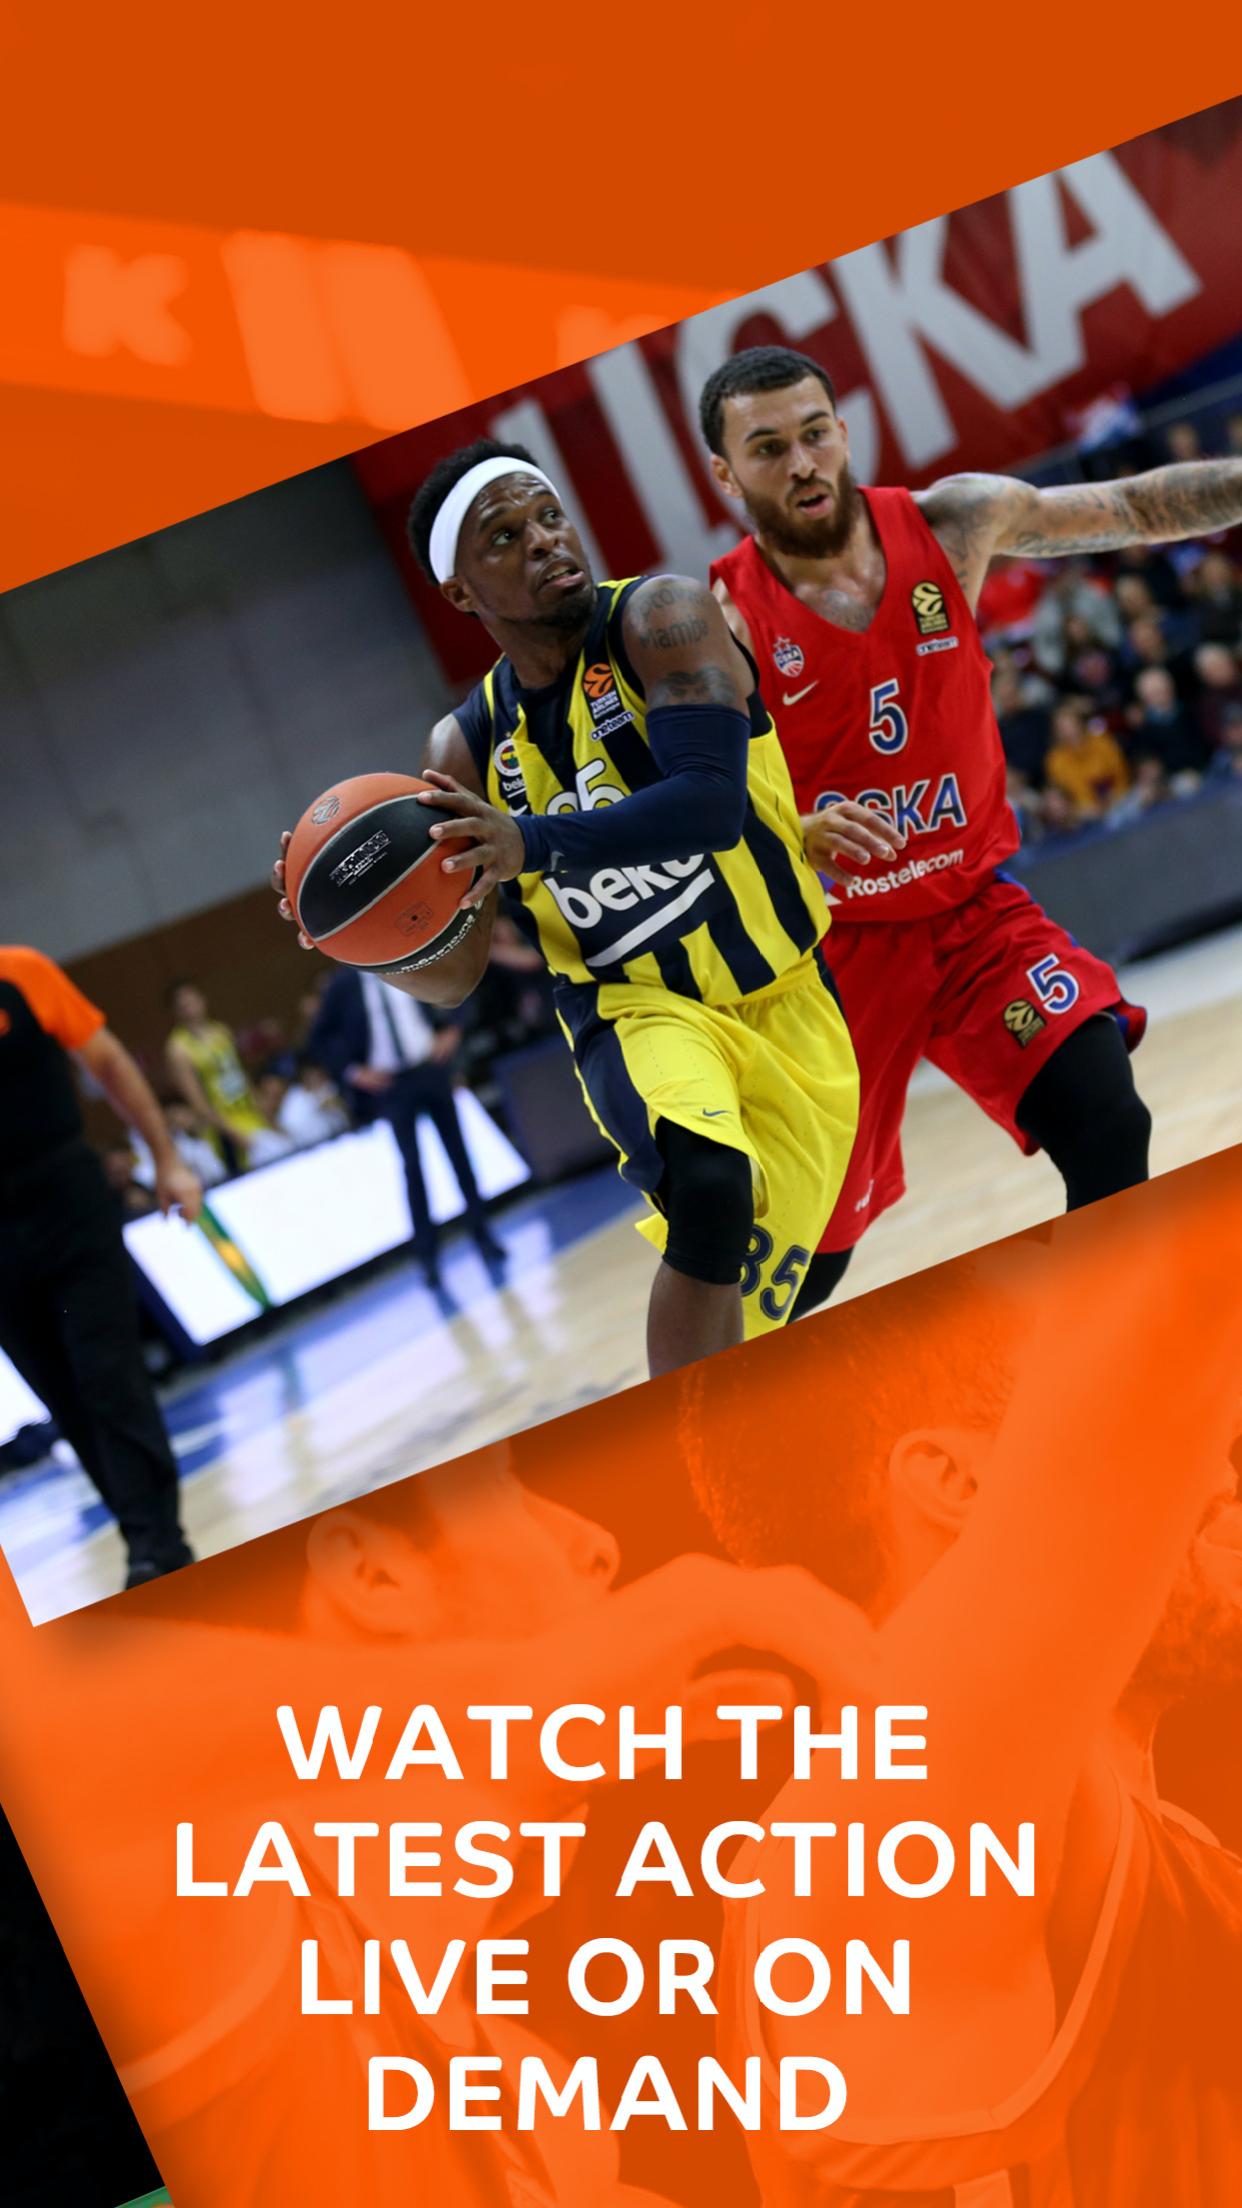 EuroLeague TV for Android - APK Download